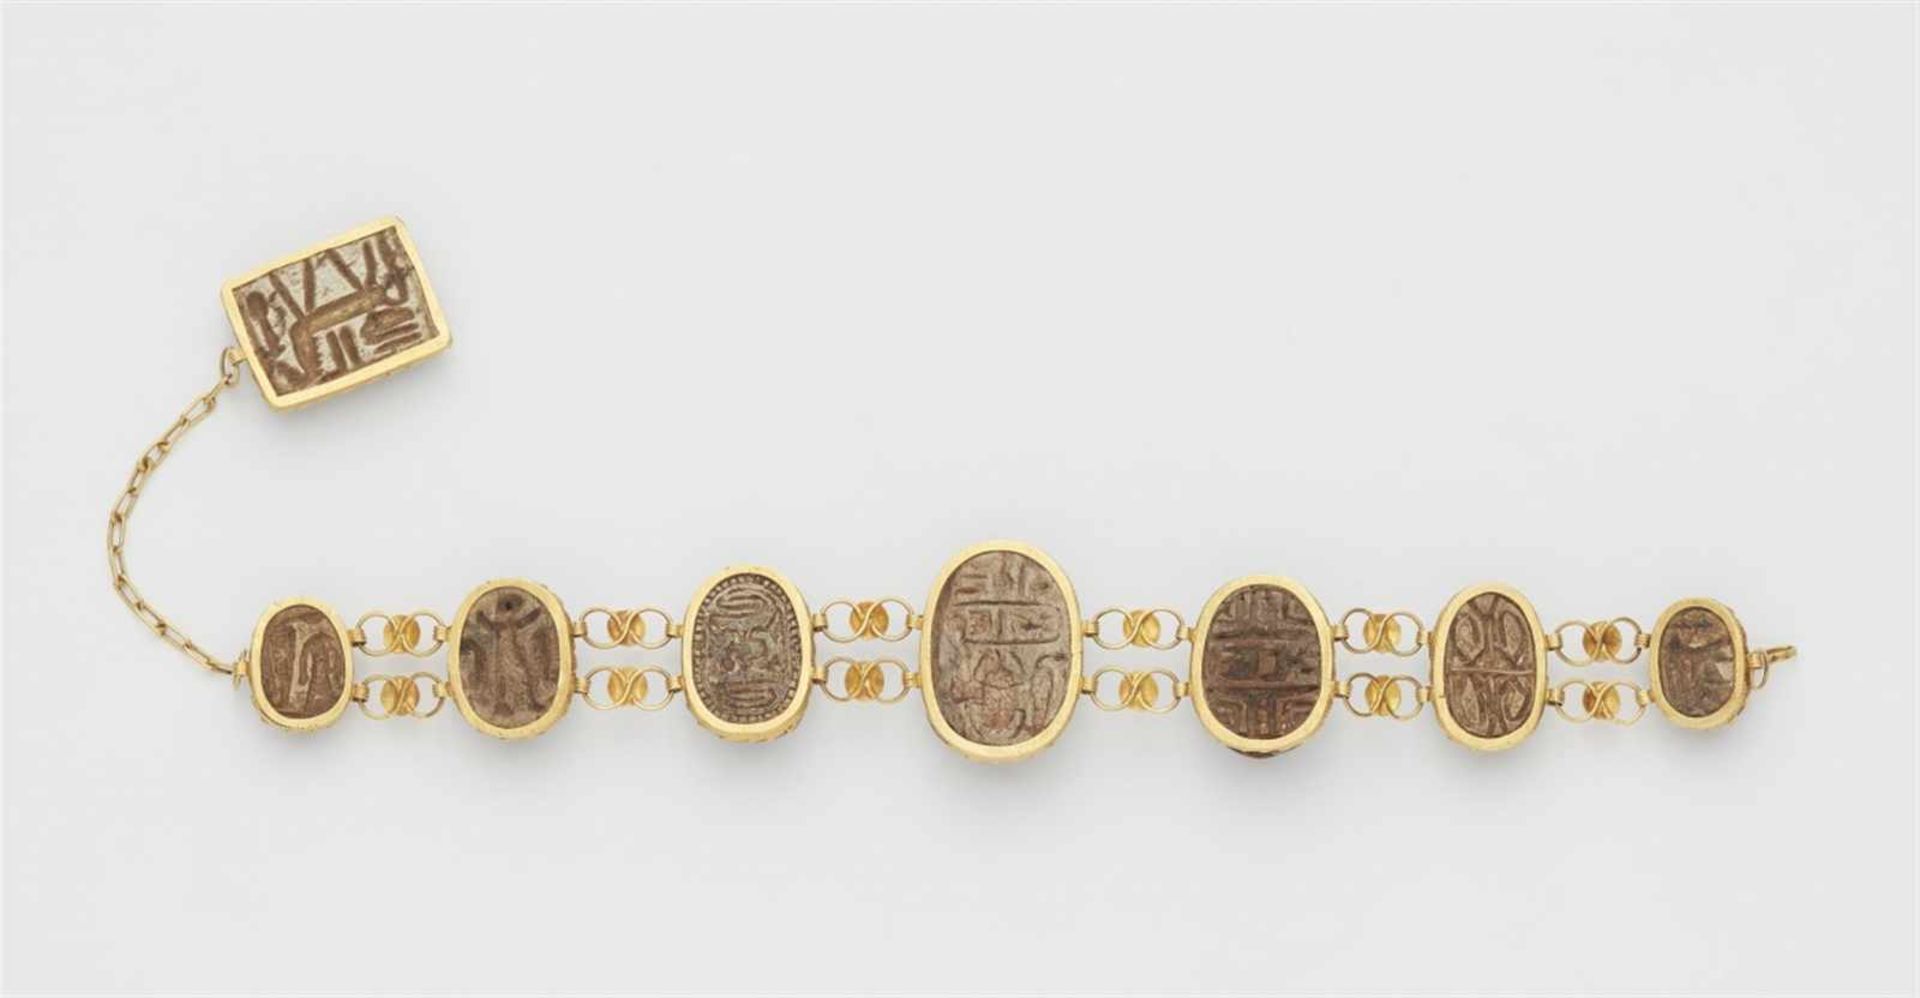 A 21k gold bracelet with scarab amuletsDesigned as a band of seven ancient Egyptian scarab beetle - Bild 2 aus 2